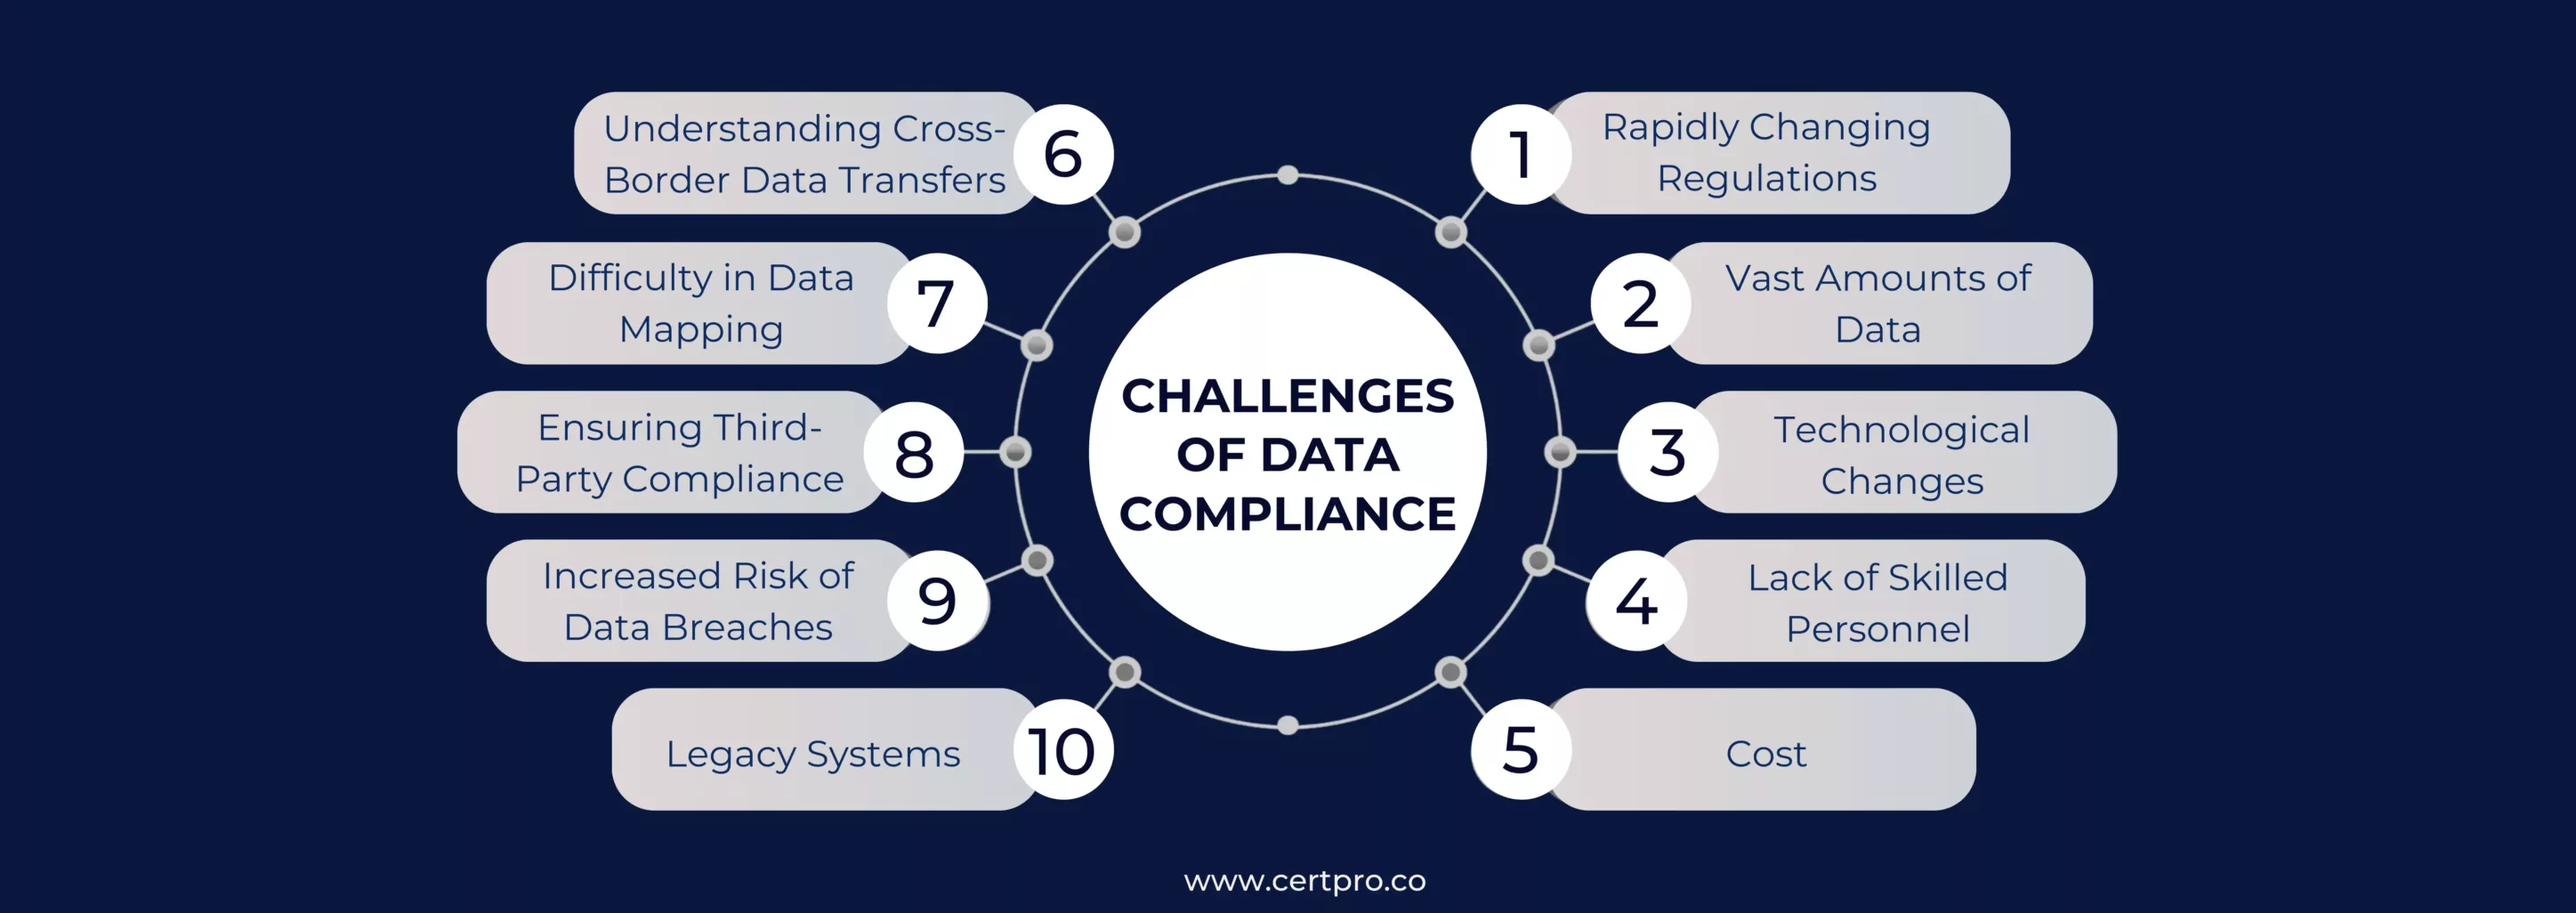 CHALLENGES OF DATA COMPLIANCE